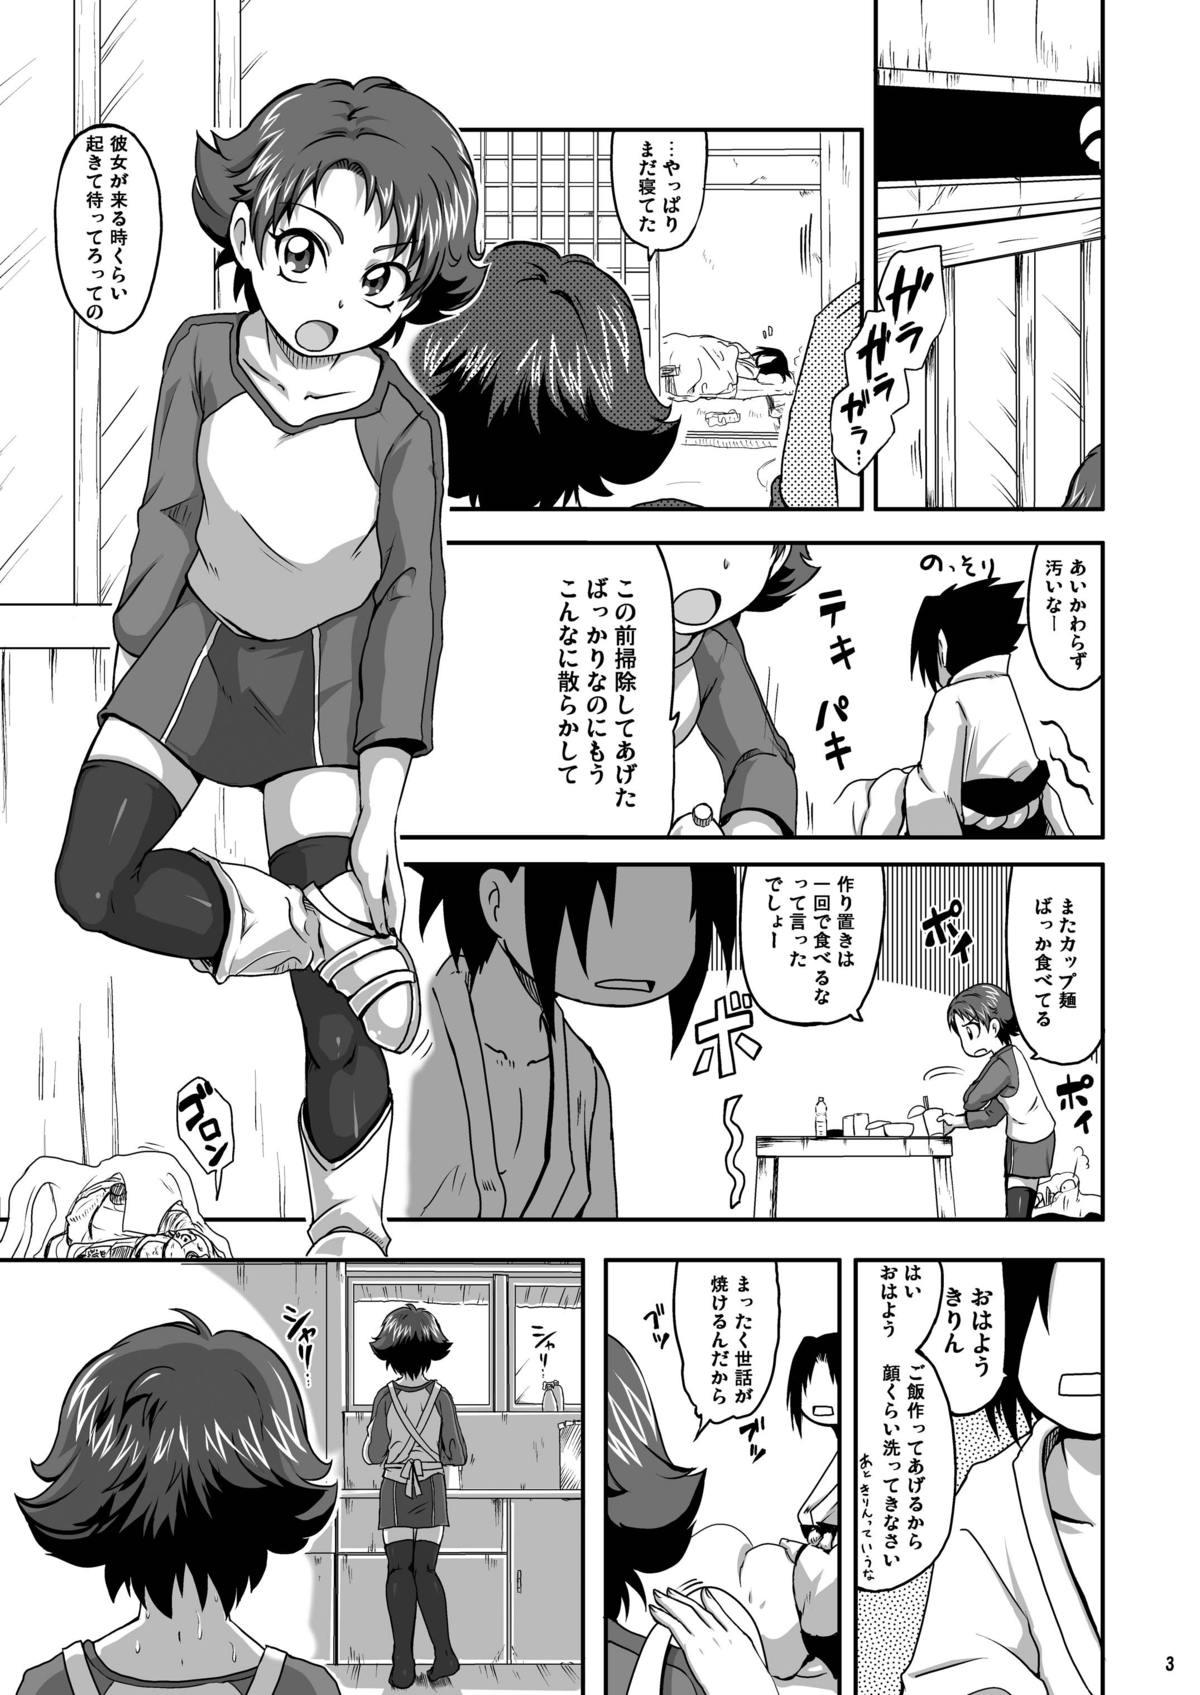 Banging Love Love Fire Strike - Yes precure 5 Eating - Page 3